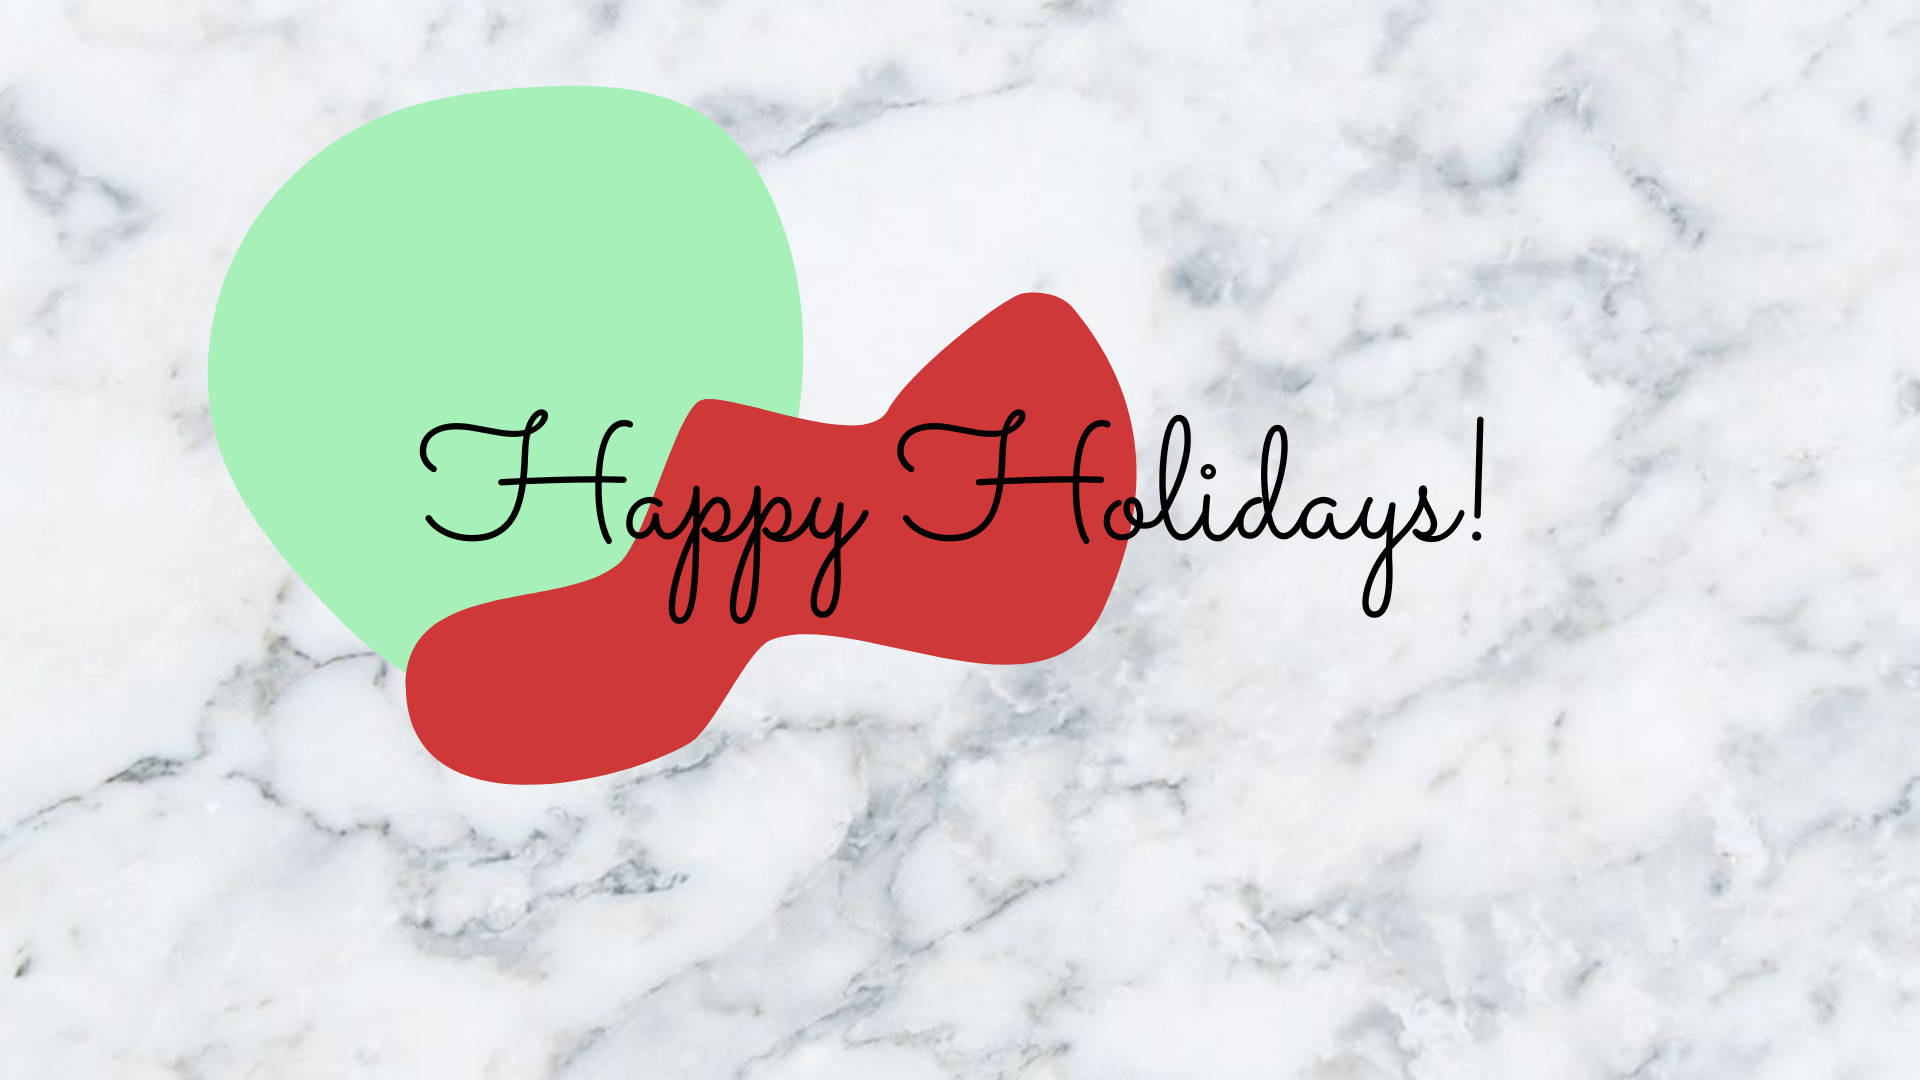 Holiday Greetings On White Marble Background